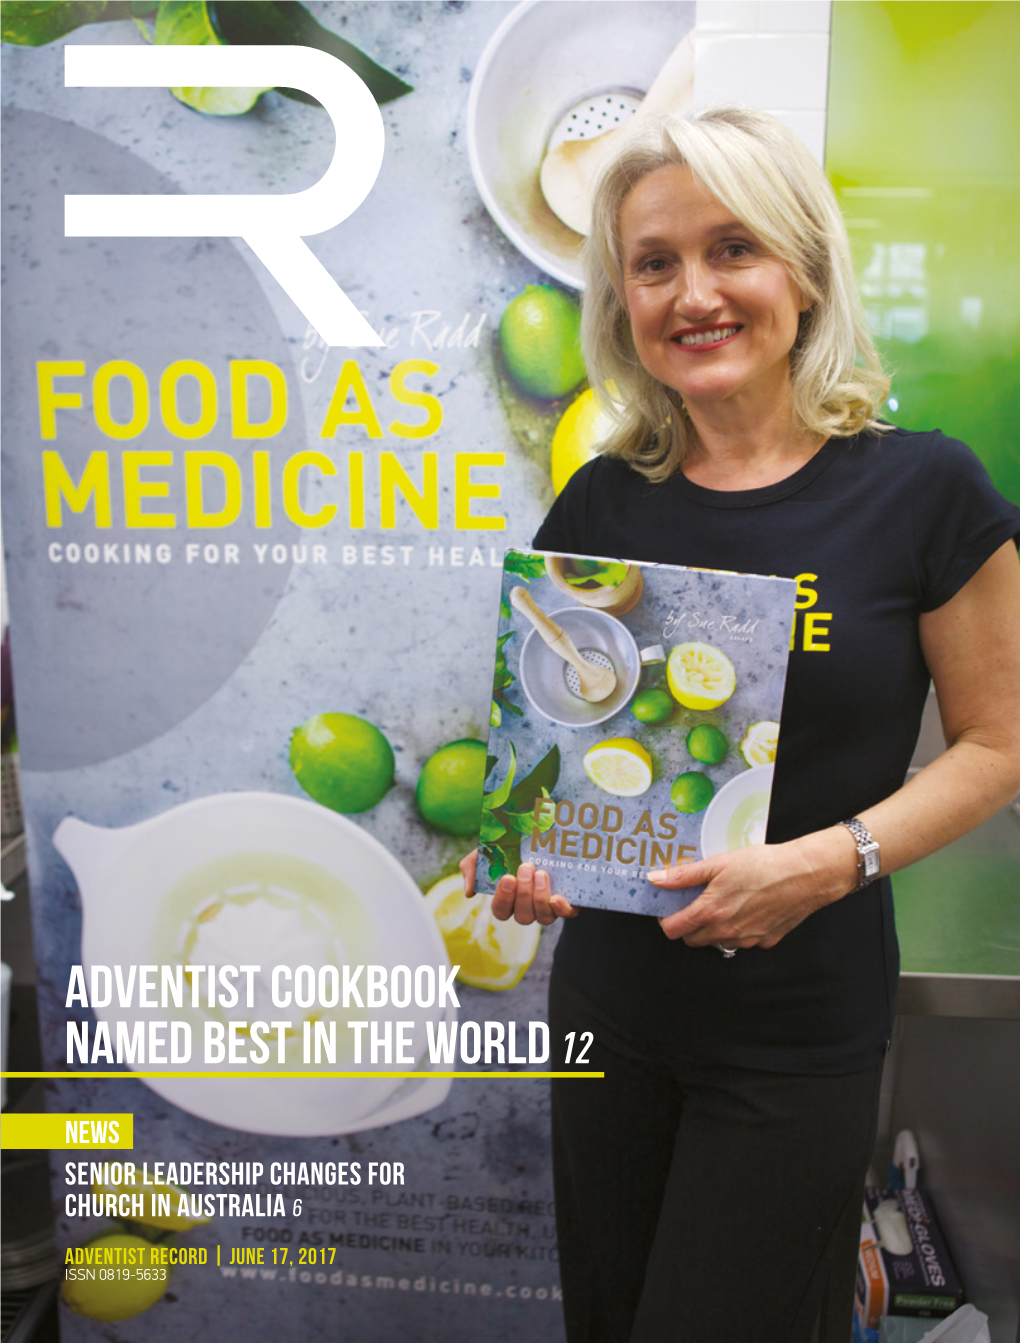 Adventist Cookbook Named Best in the World 12